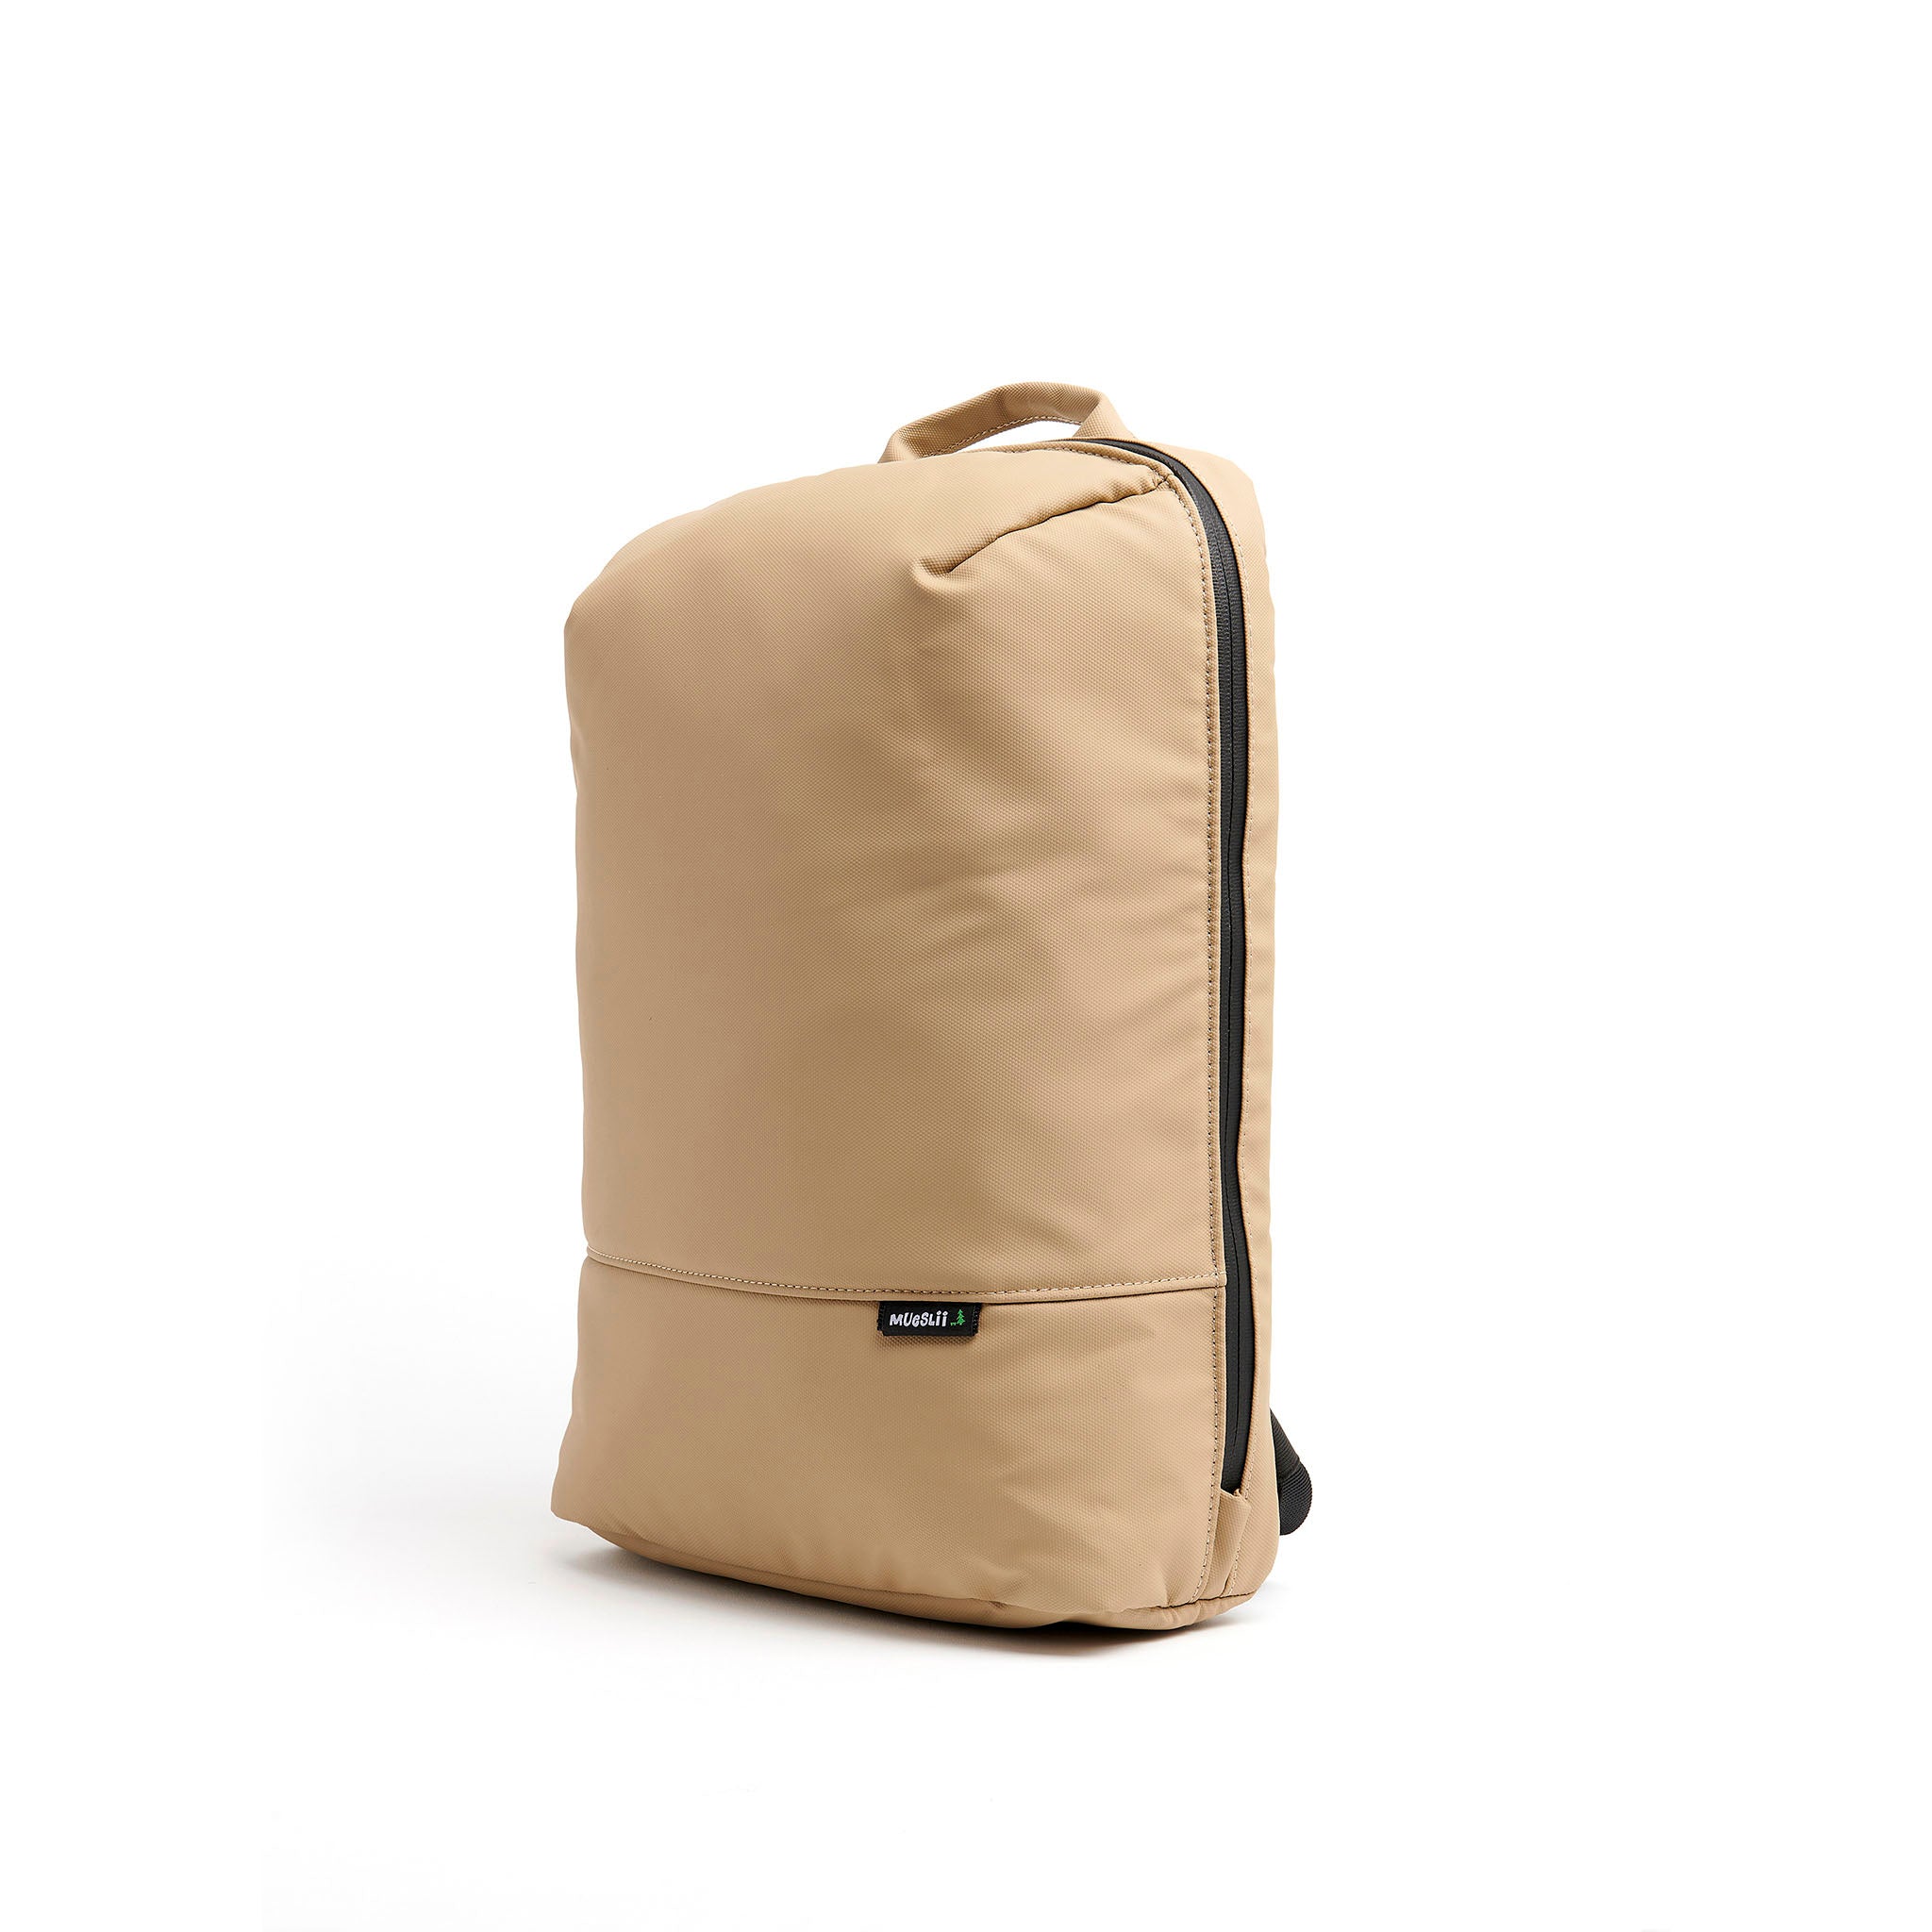 Mueslii daily backpack, made of PU coated waterproof nylon, with a laptop compartment, color sand, side view.